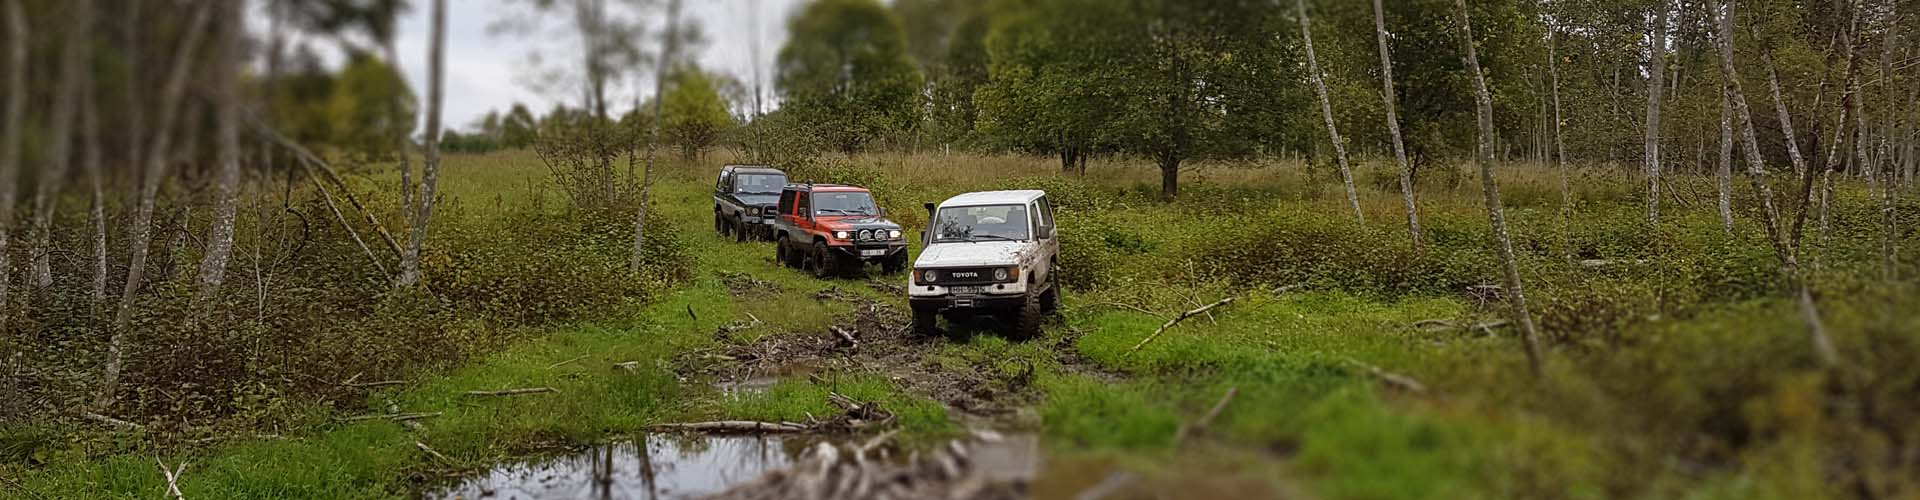 npl-overland-offroad-scout-our-lettland-header-2018